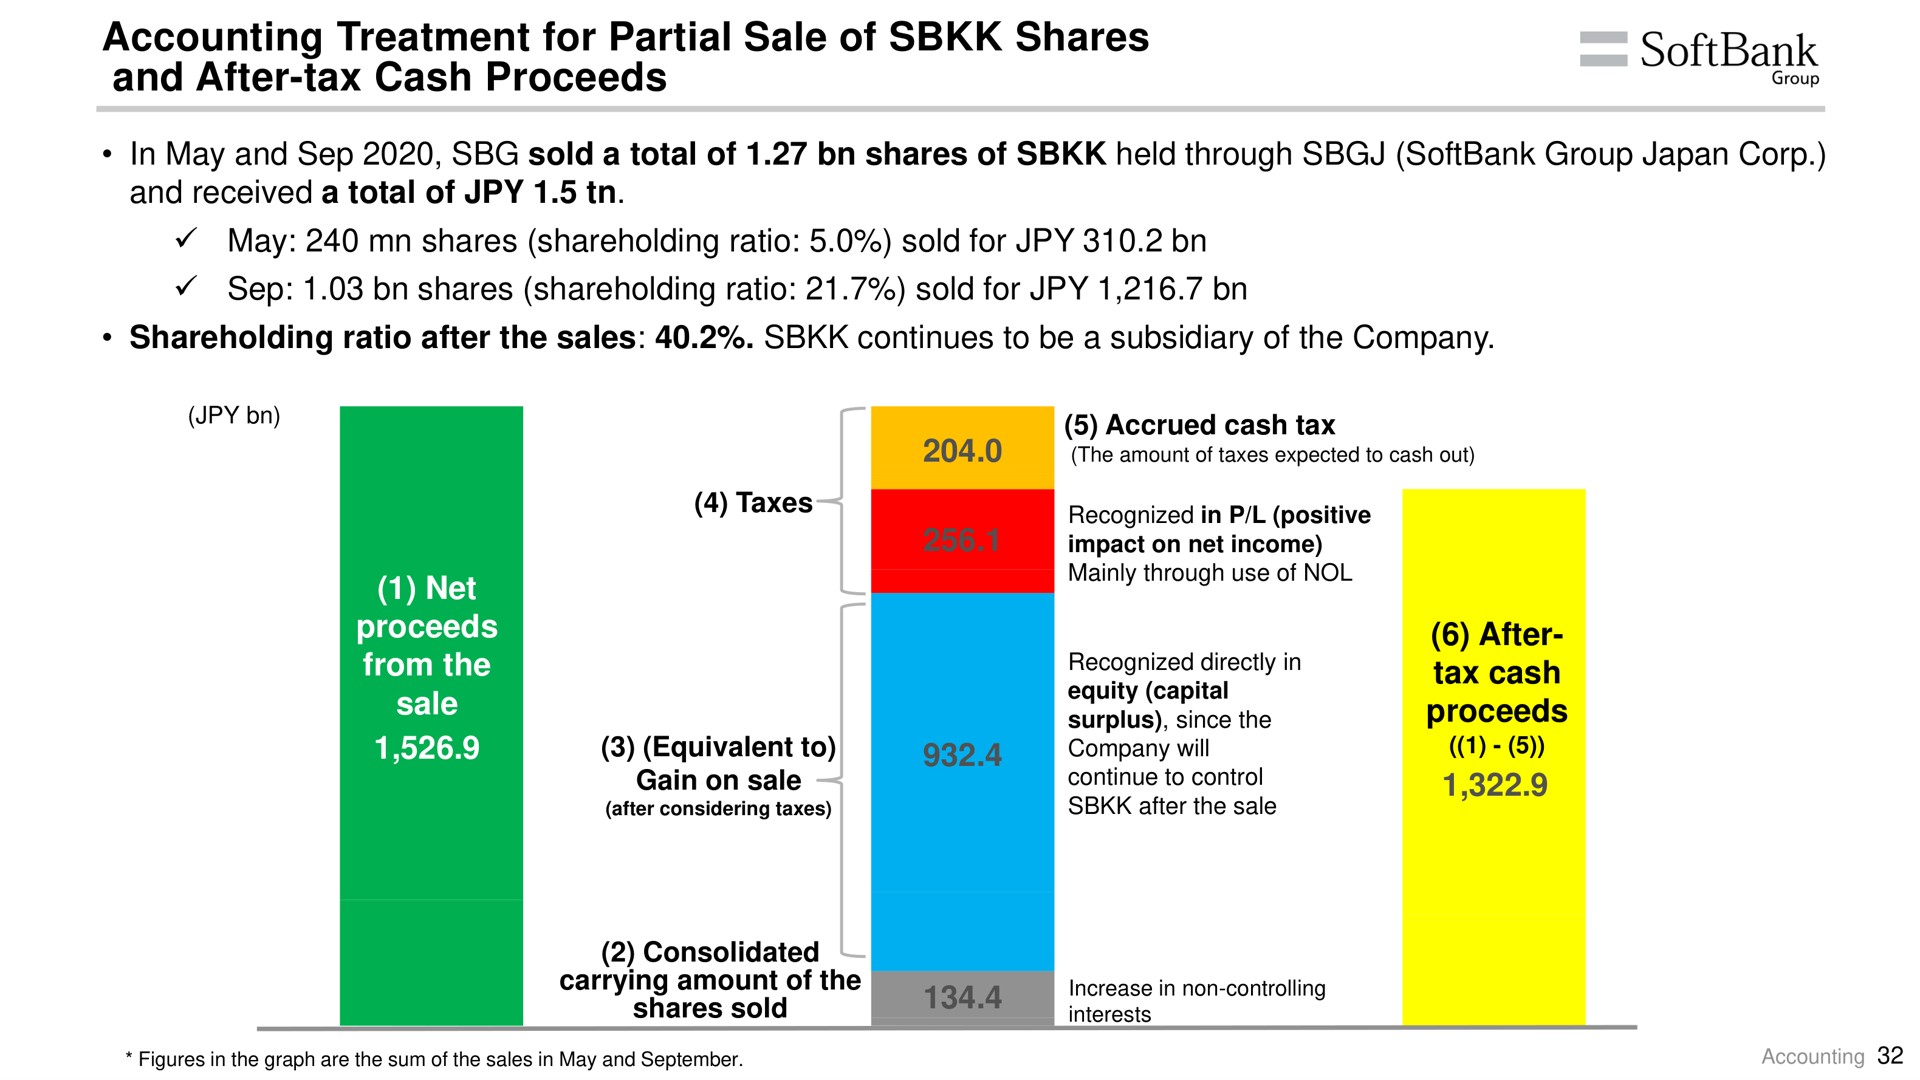 accounting treatment for partial sale of shares and after tax cash proceeds roup | SoftBank